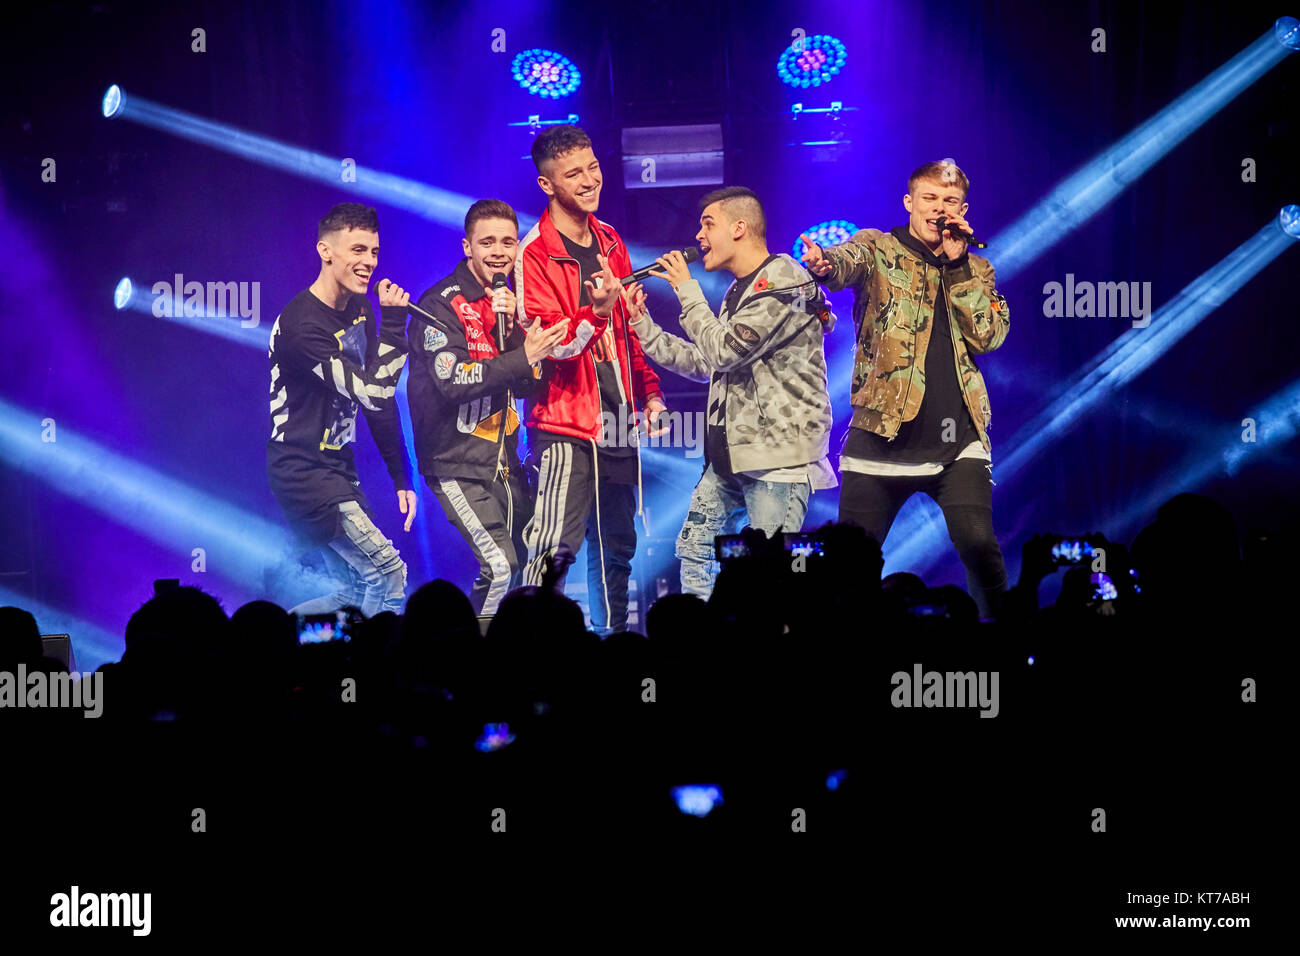 Christmas lights switch on 2017 at albert Square in Manchester city centre X Factor success story Yes Lad 5 peace boy band Stock Photo